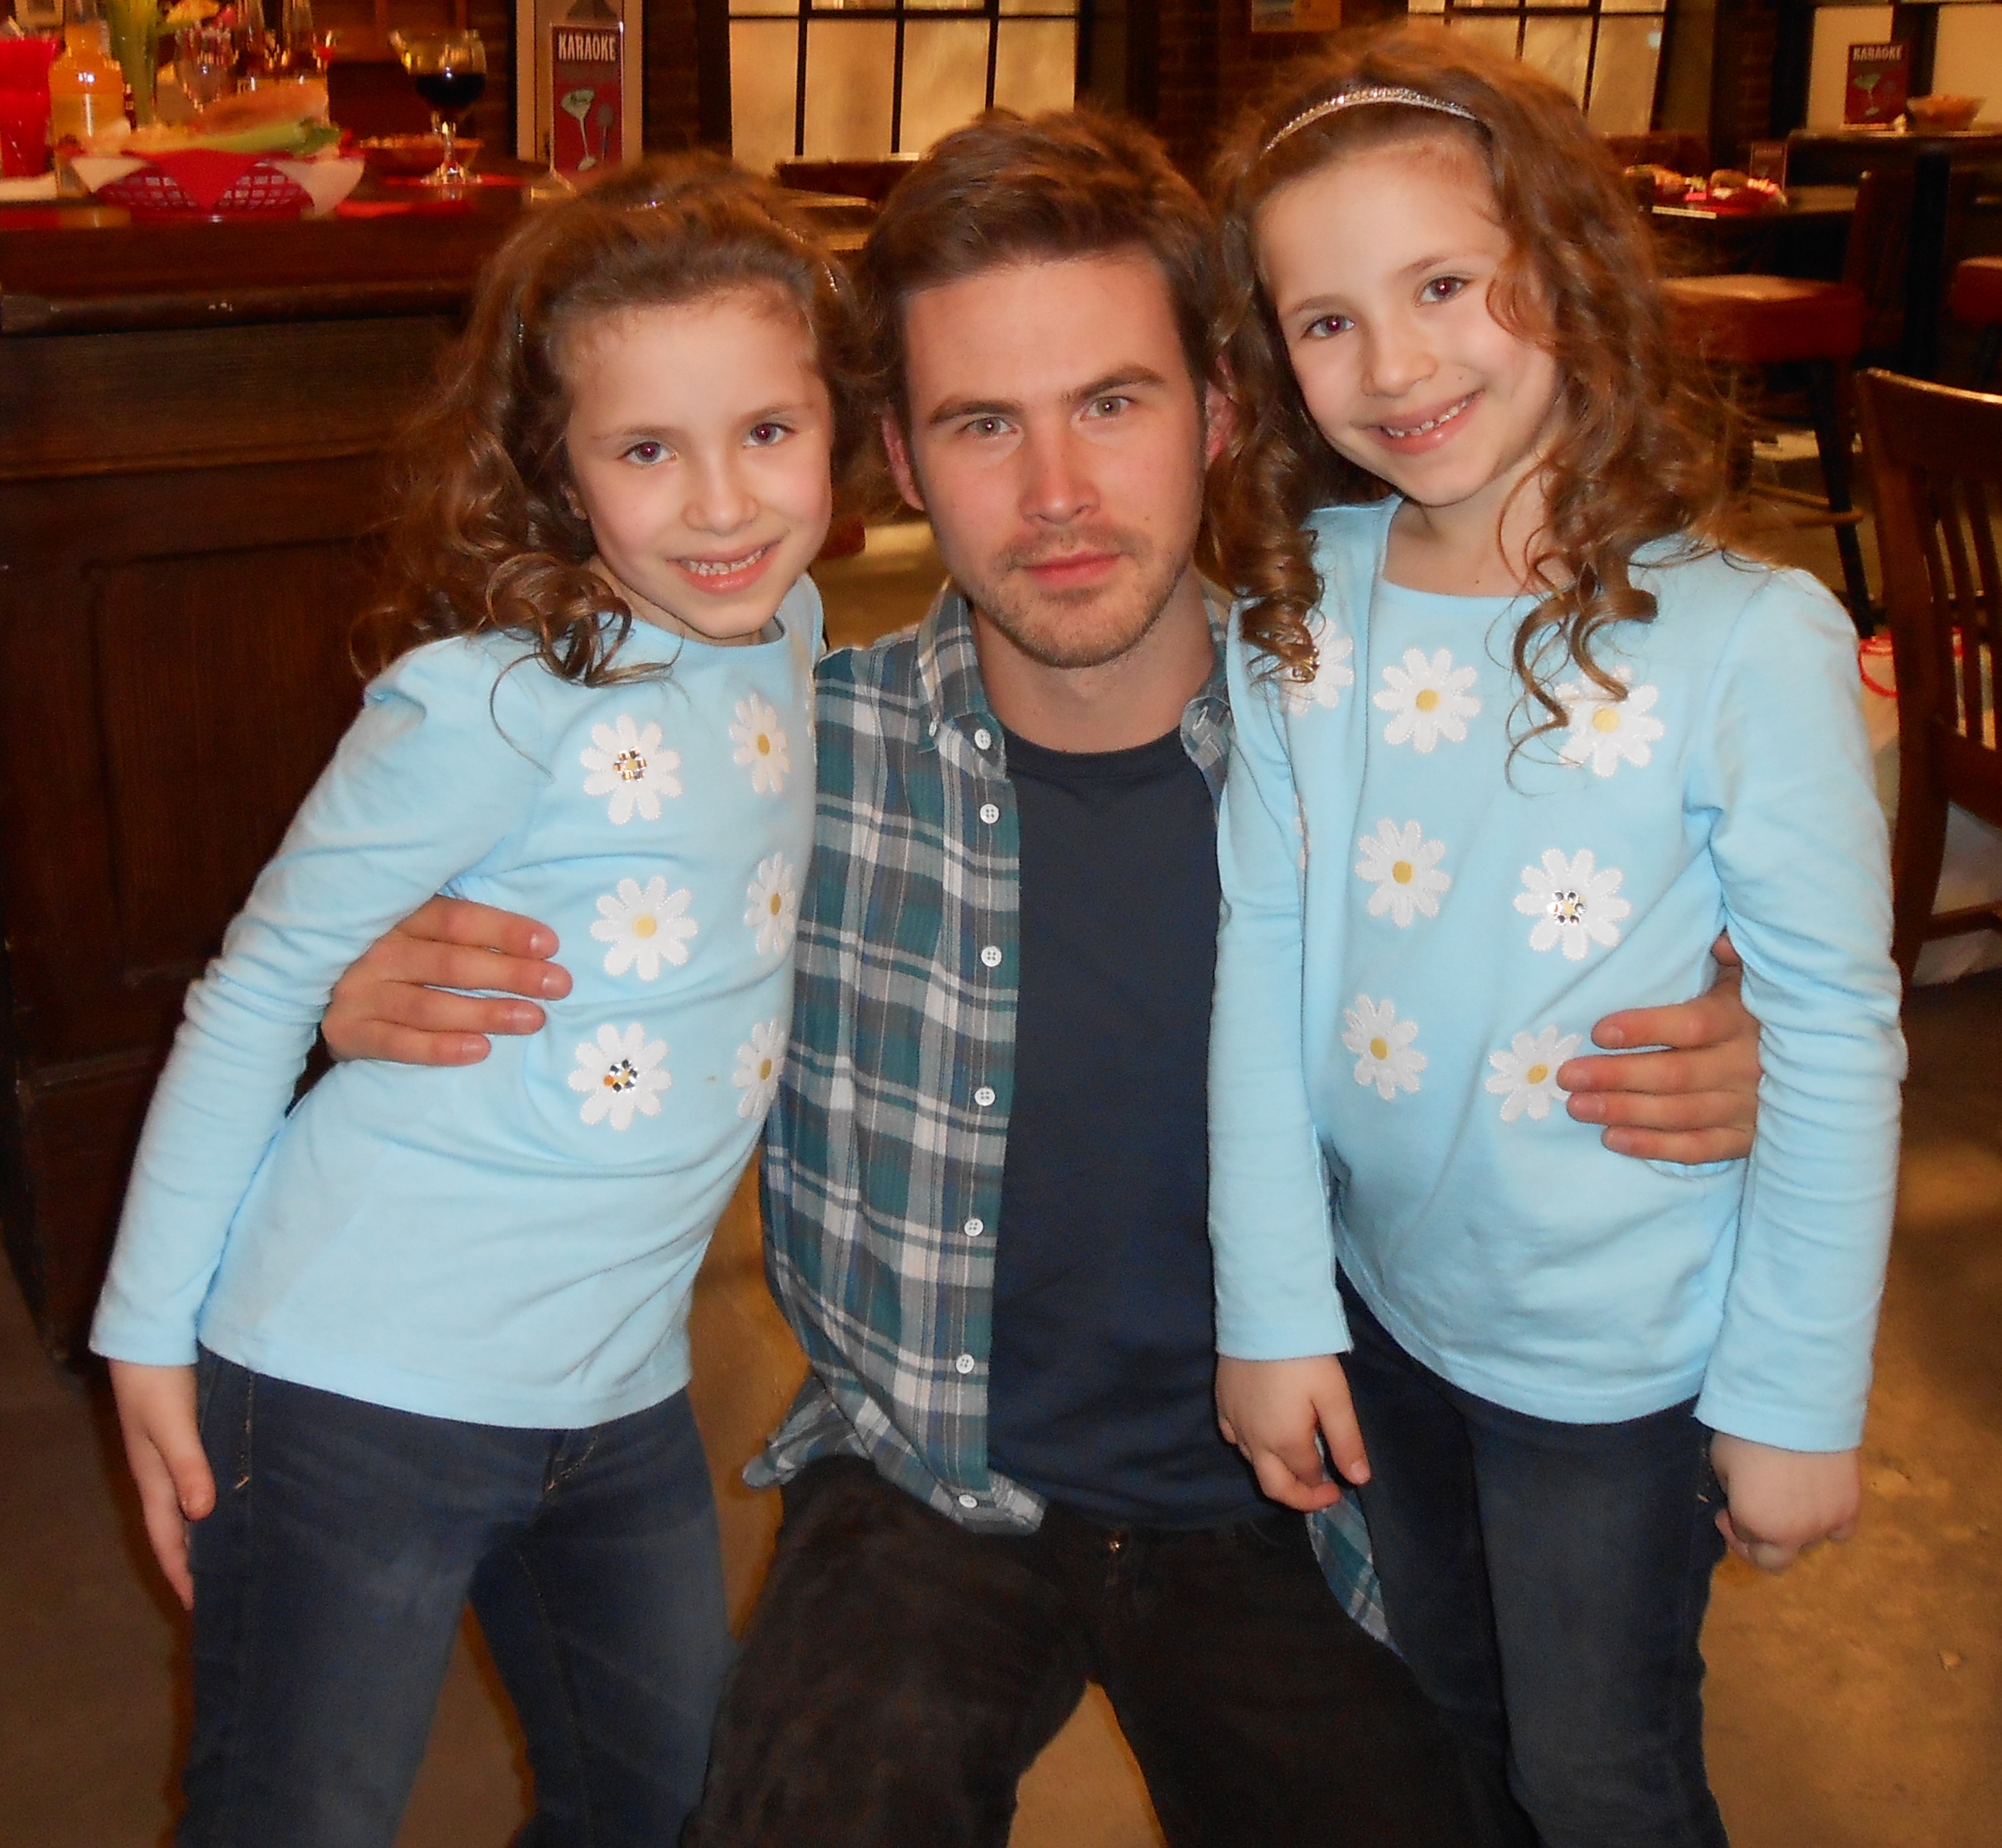 Bianca and Chiara Dambrosio with Zach Cregger on set of Guys with Kids March 2012